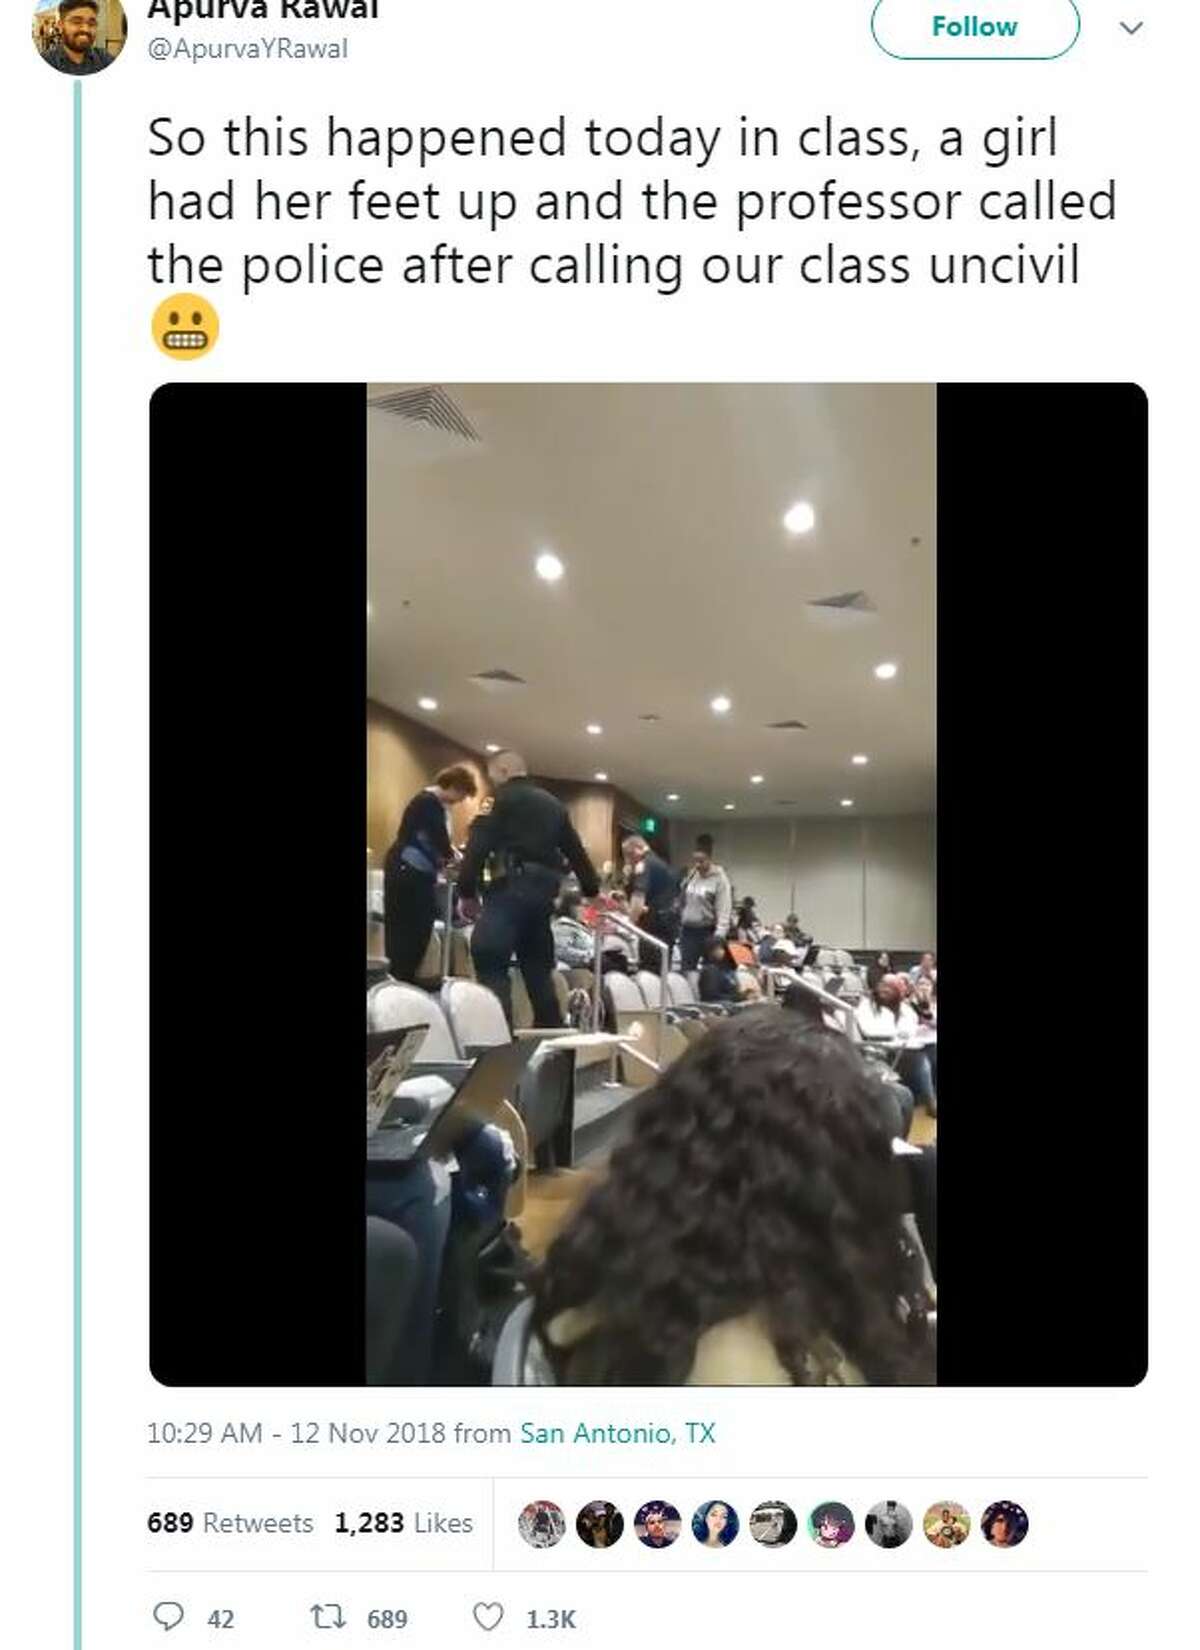 1. So this happened today in class, a girl had her feet up and the professor called the police after calling our class uncivil.